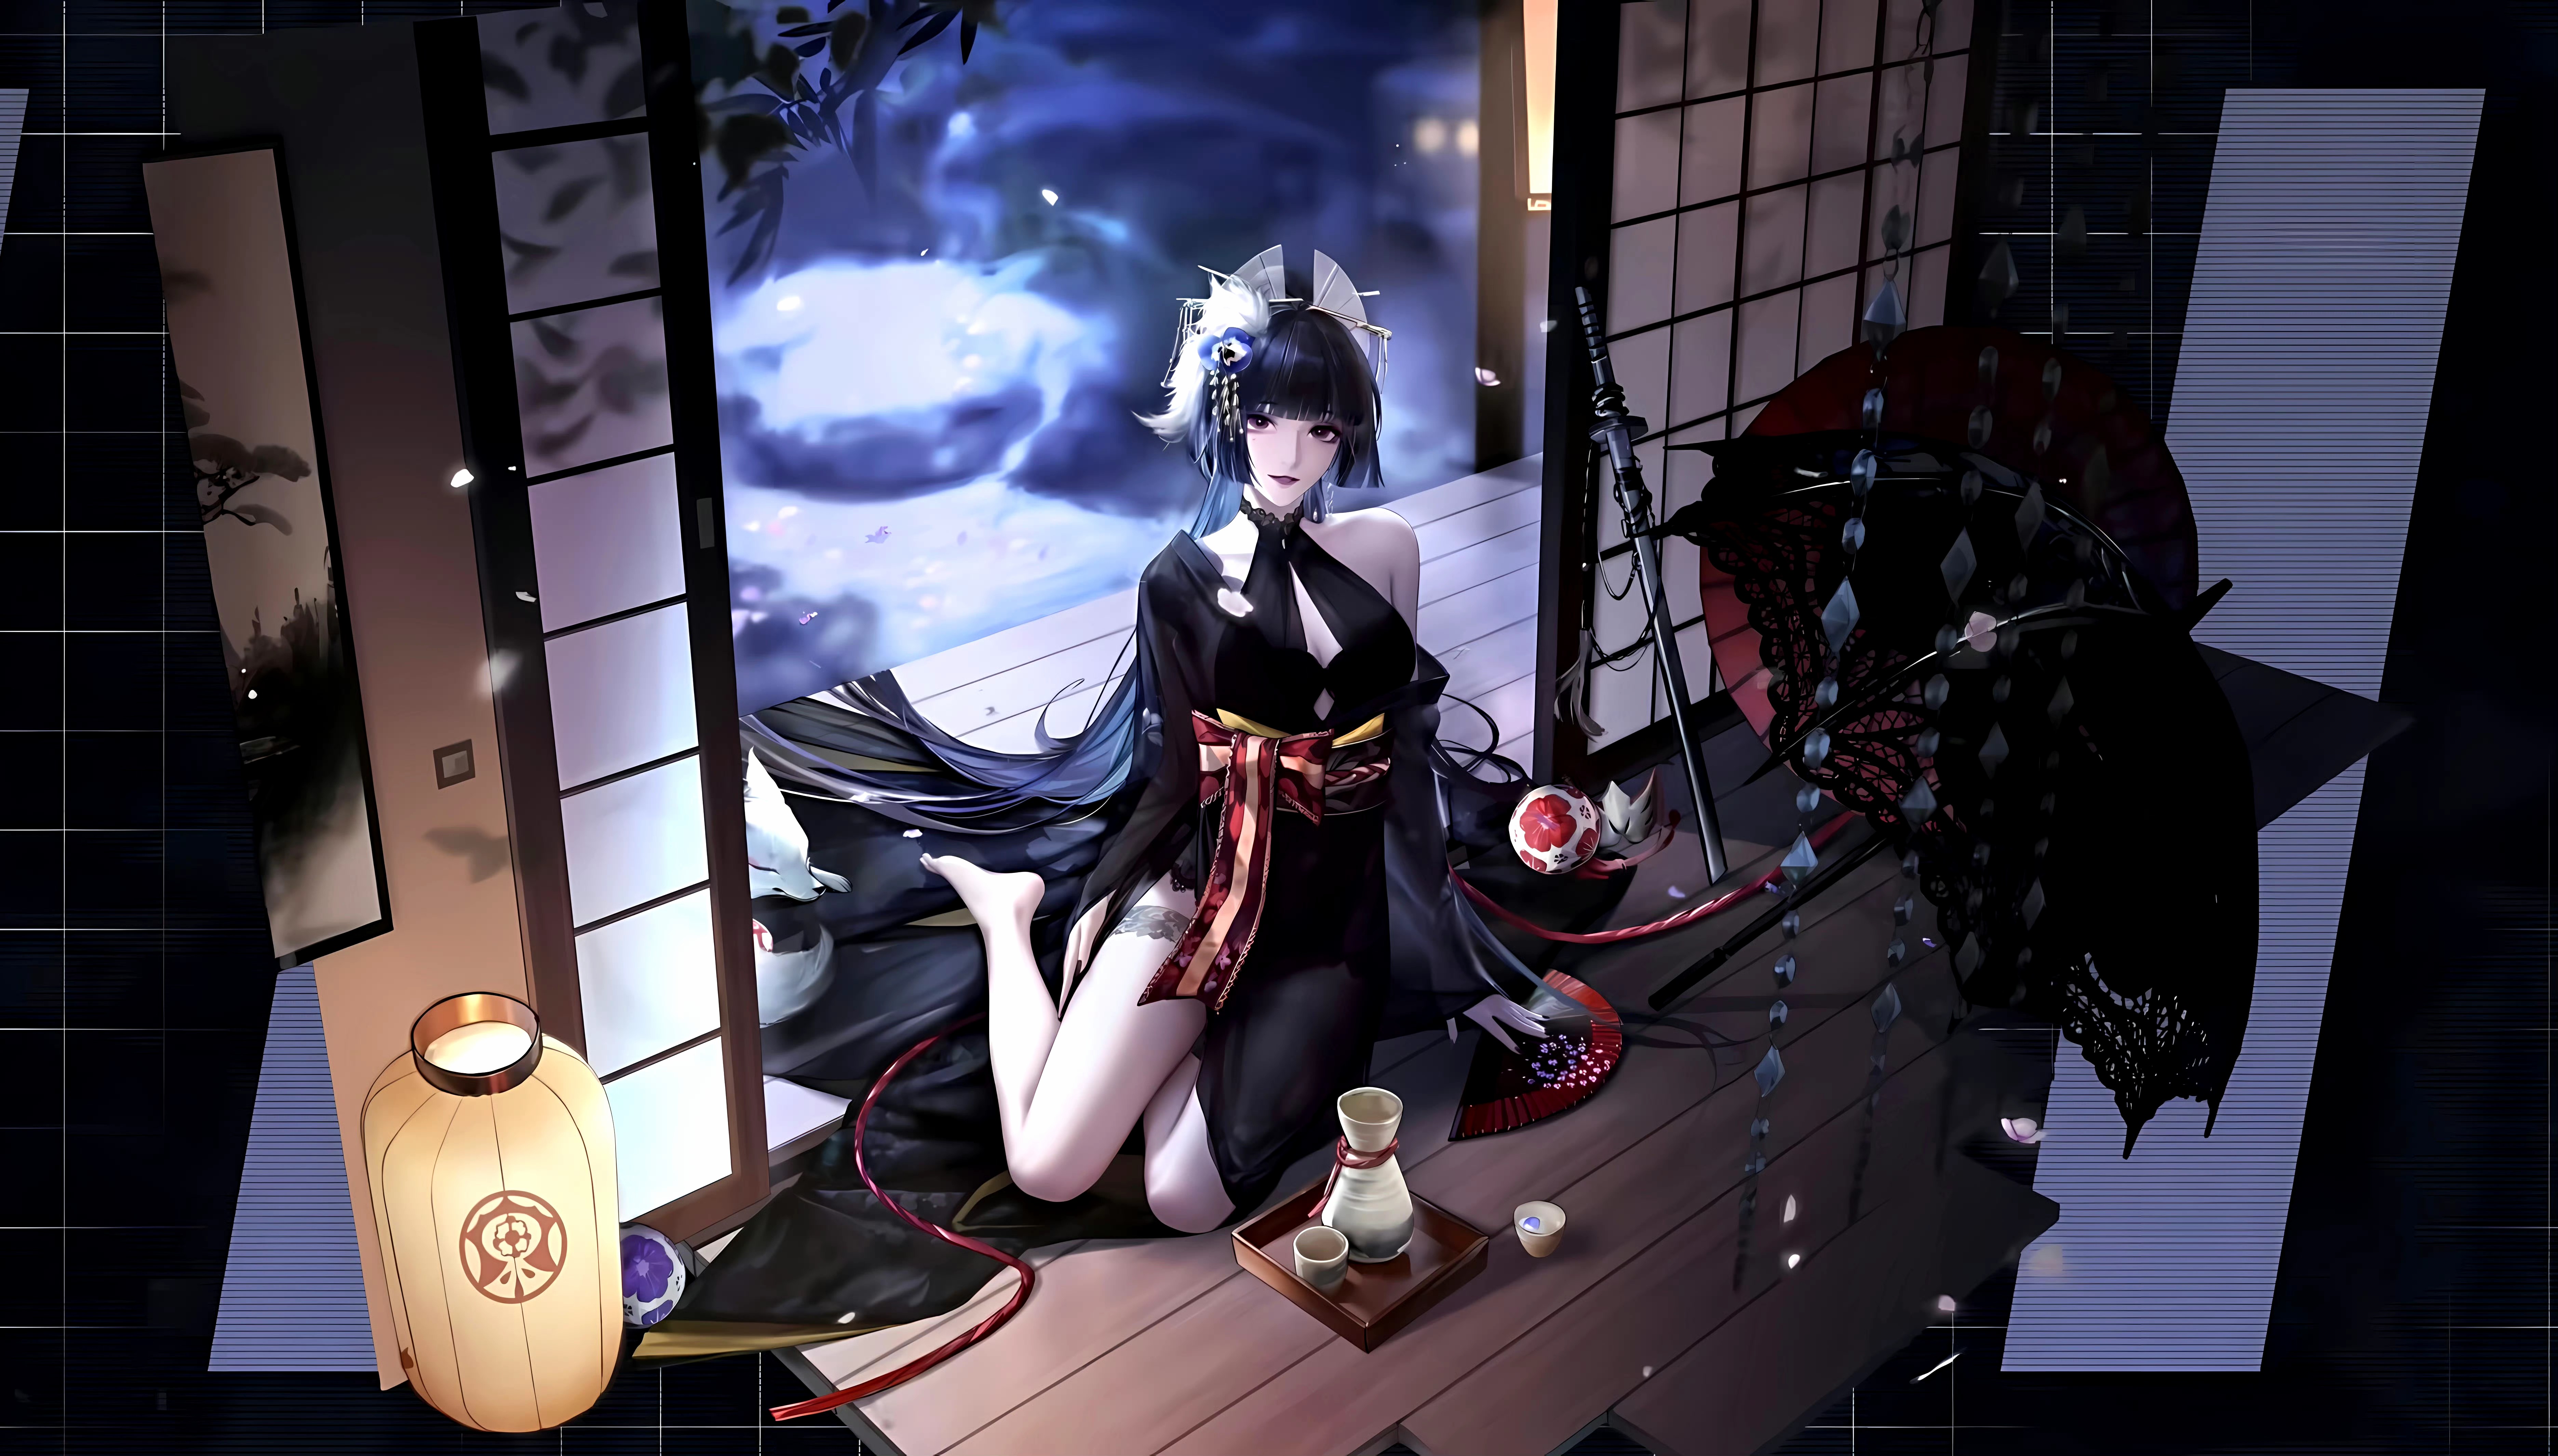 Anime 7484x4260 anime girls anime Sumire (Path to Nowhere) Path to Nowhere sake night petals cup looking at viewer long hair bare shoulders on the floor katana weapon lantern floor